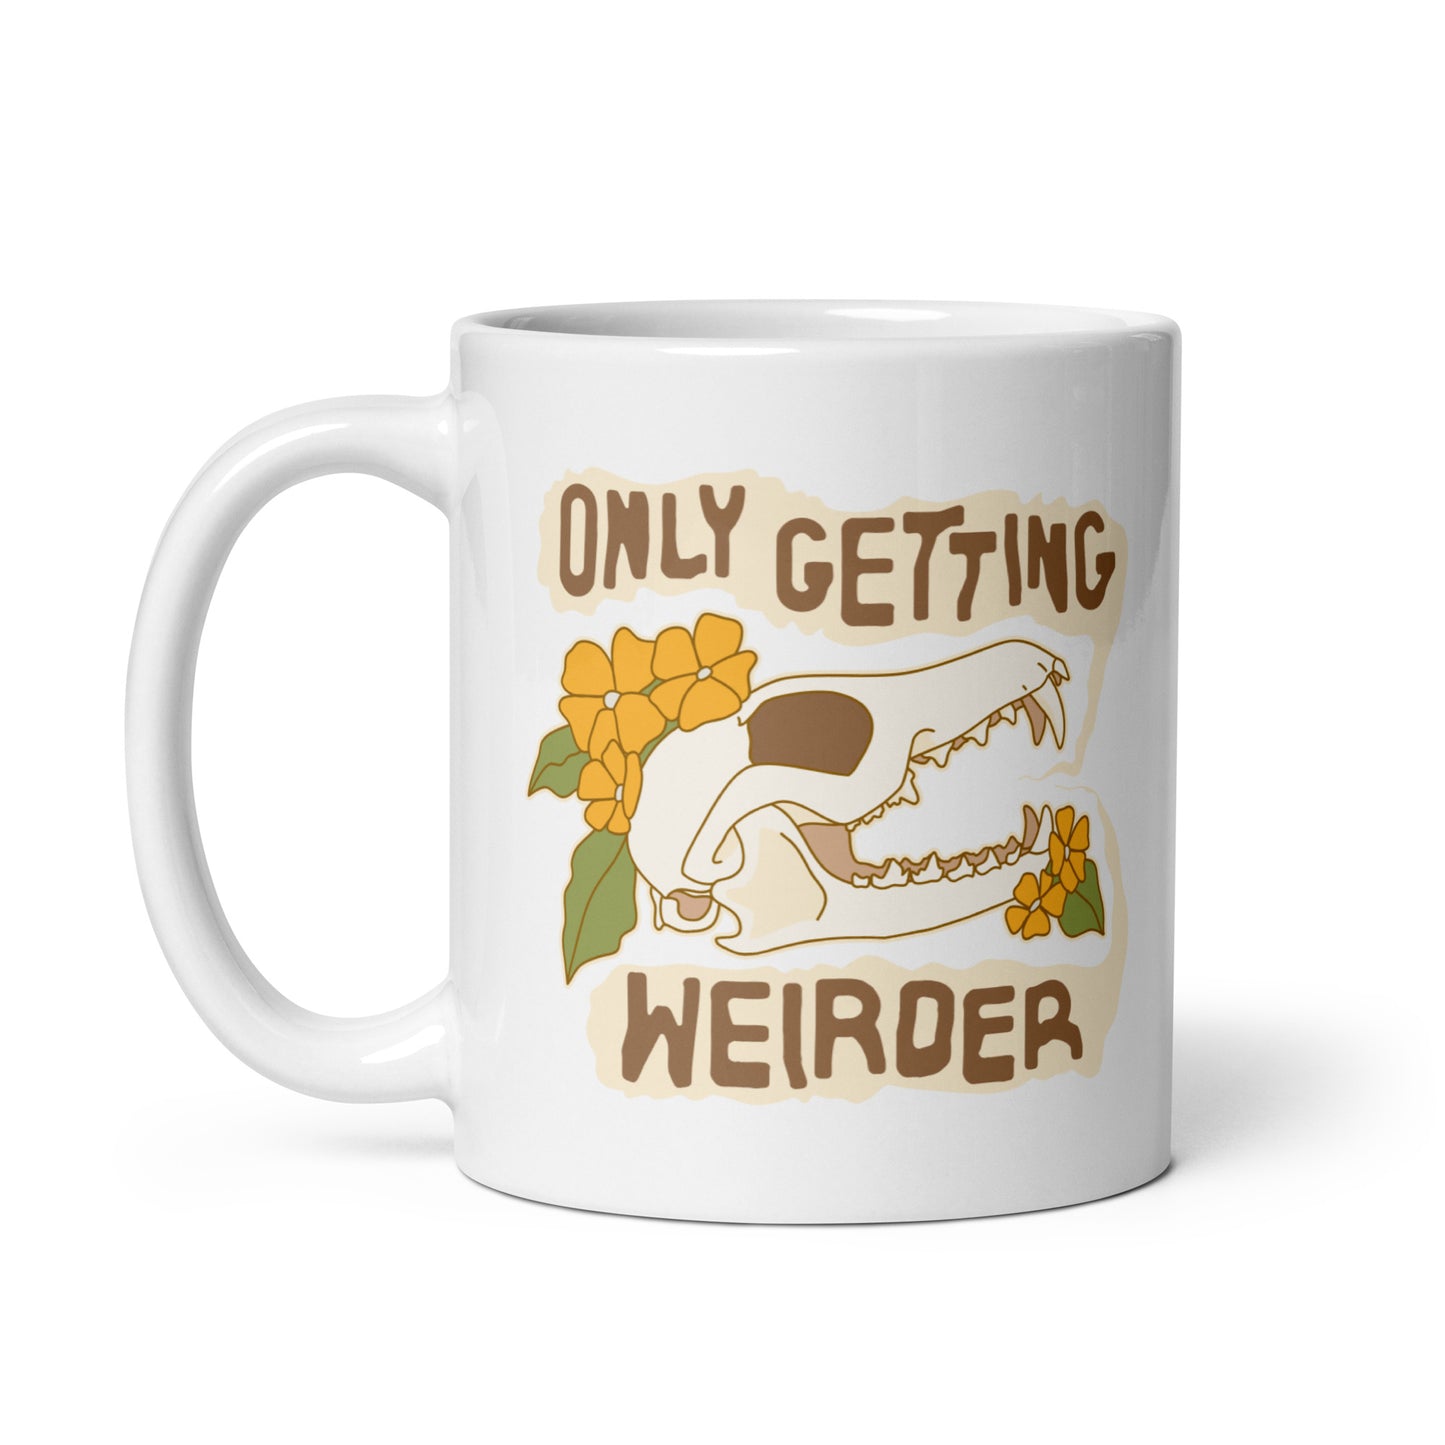 A white ceramic mug featuring an illustration of a fox skull surrounded by yellow flowers. Wobbly speech bubbles are coming from the fox's mouth. The text inside the bubbles reads "ONLY GETTING WEIRDER".